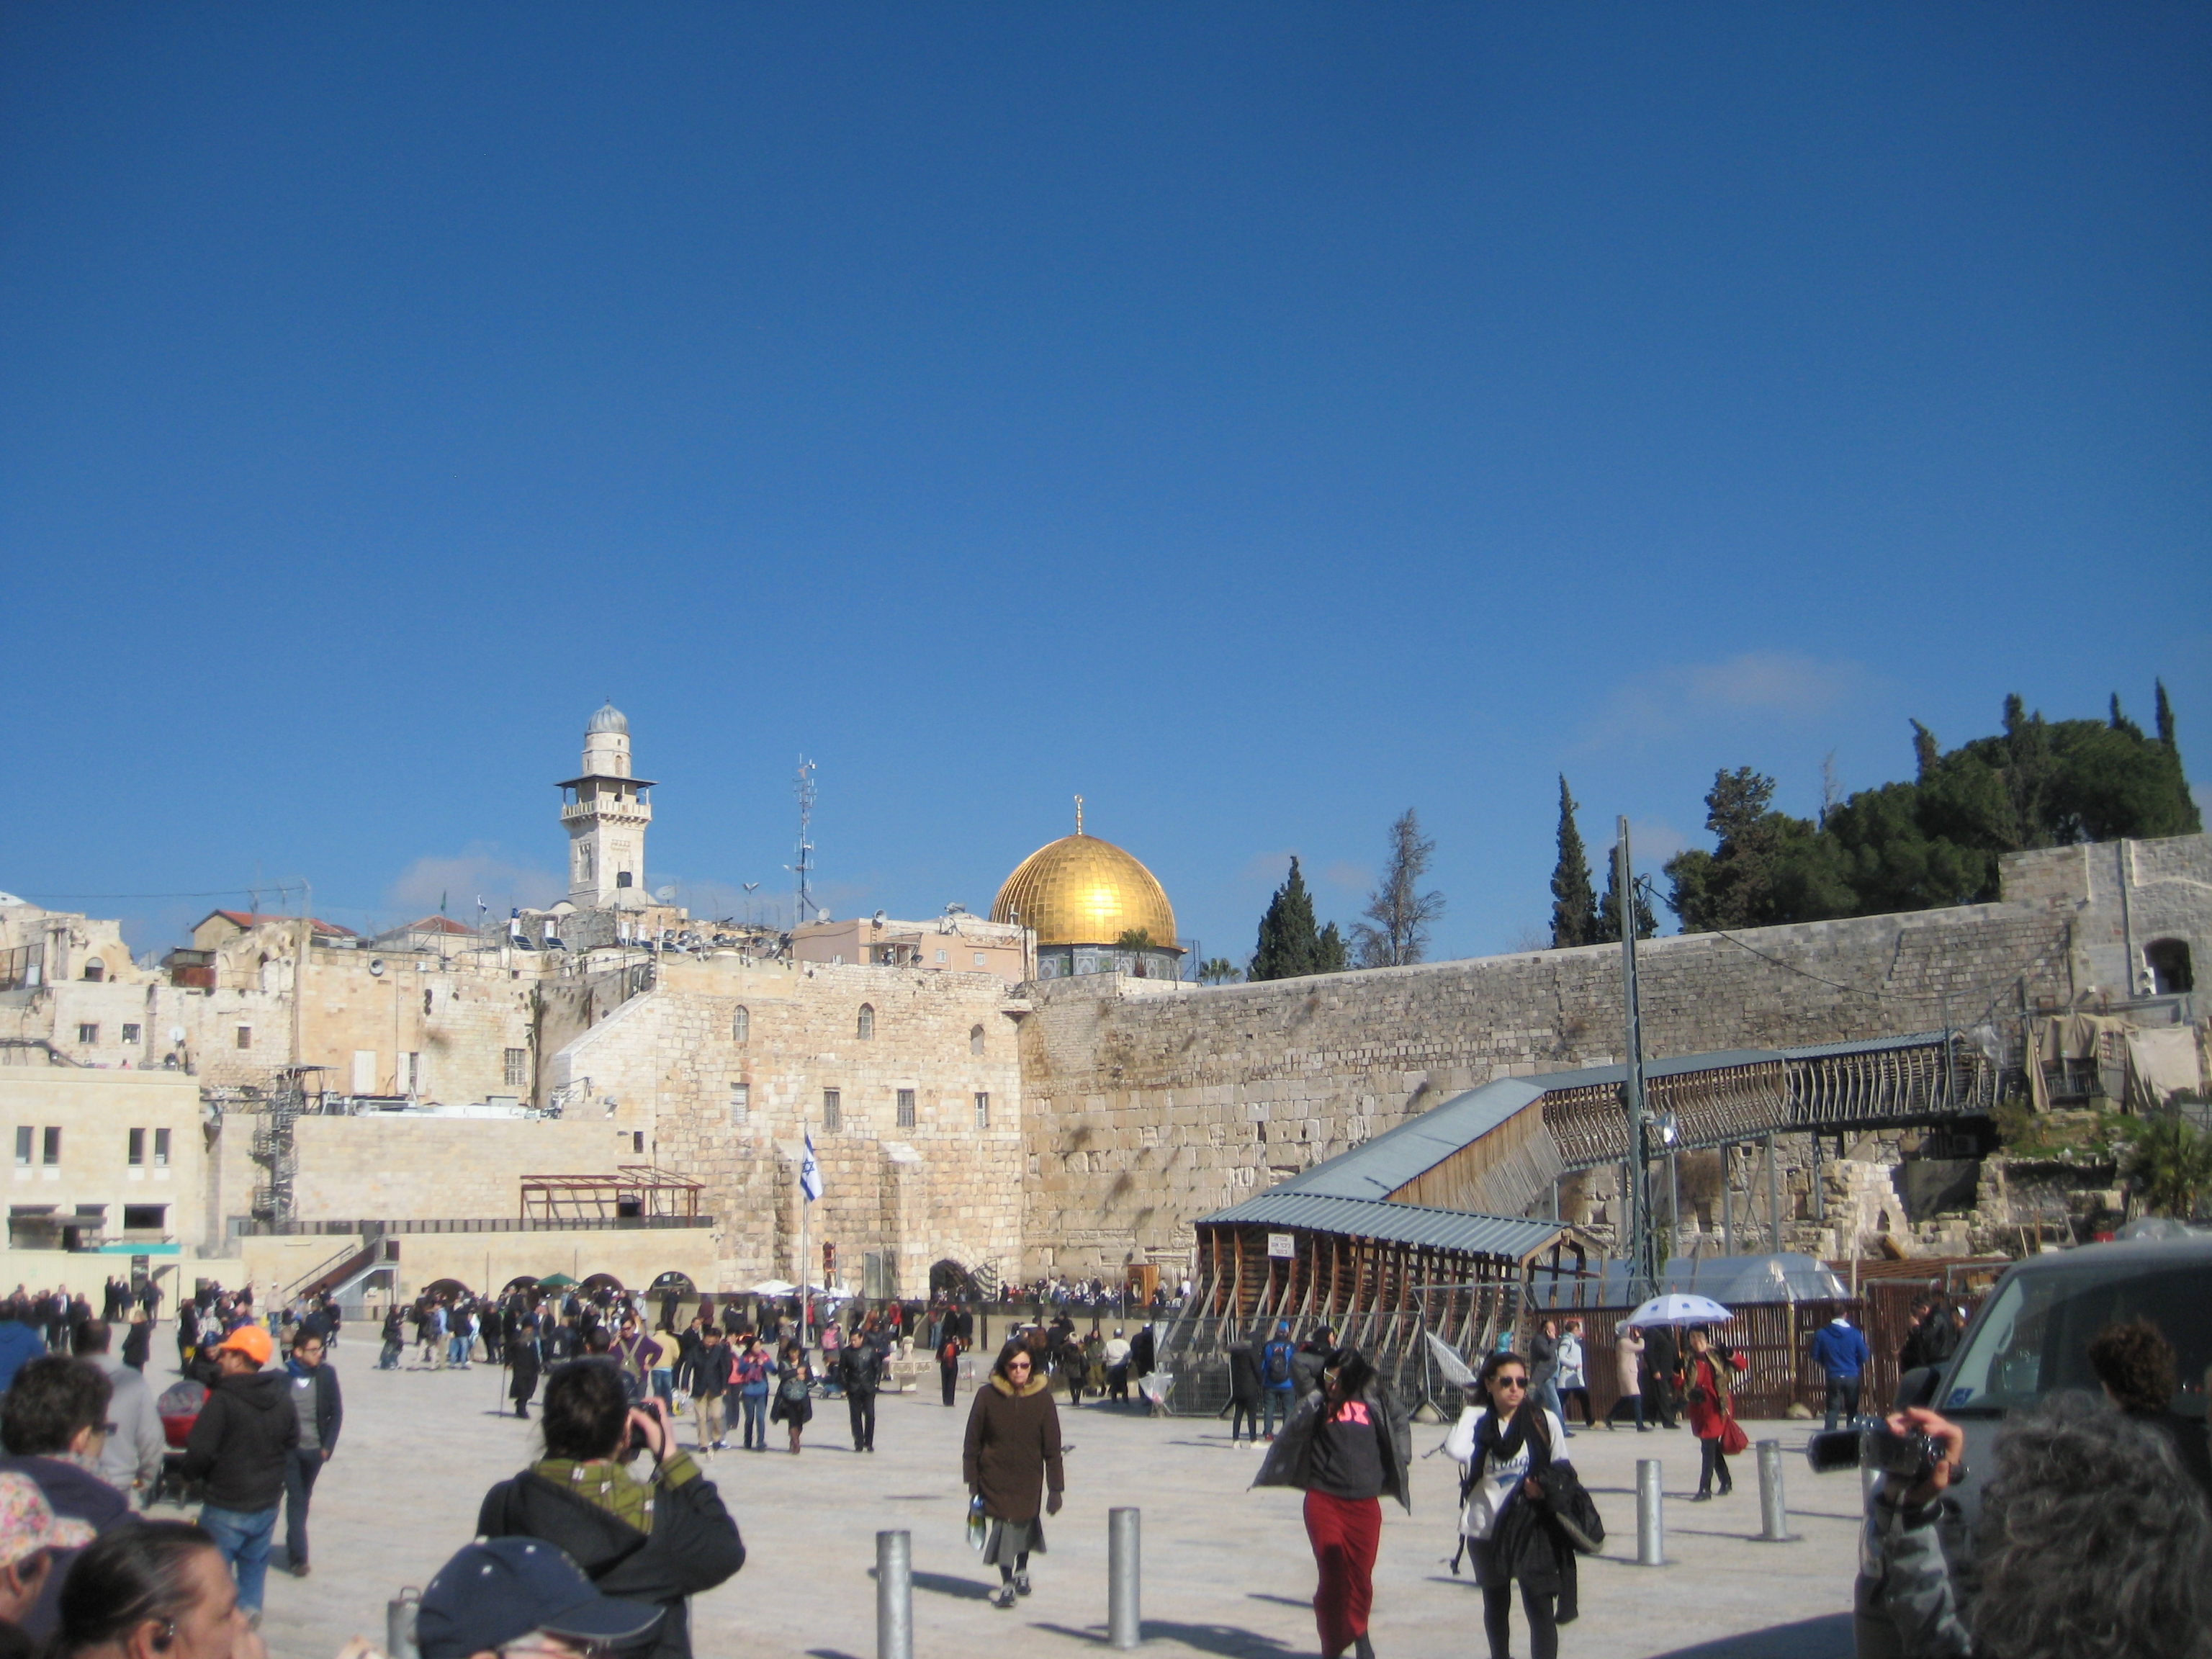 The Western Wall, right after we walked through a security checkpoint. The Muslim mosque, the Dome on the Rock, is the gold dome on the horizon.